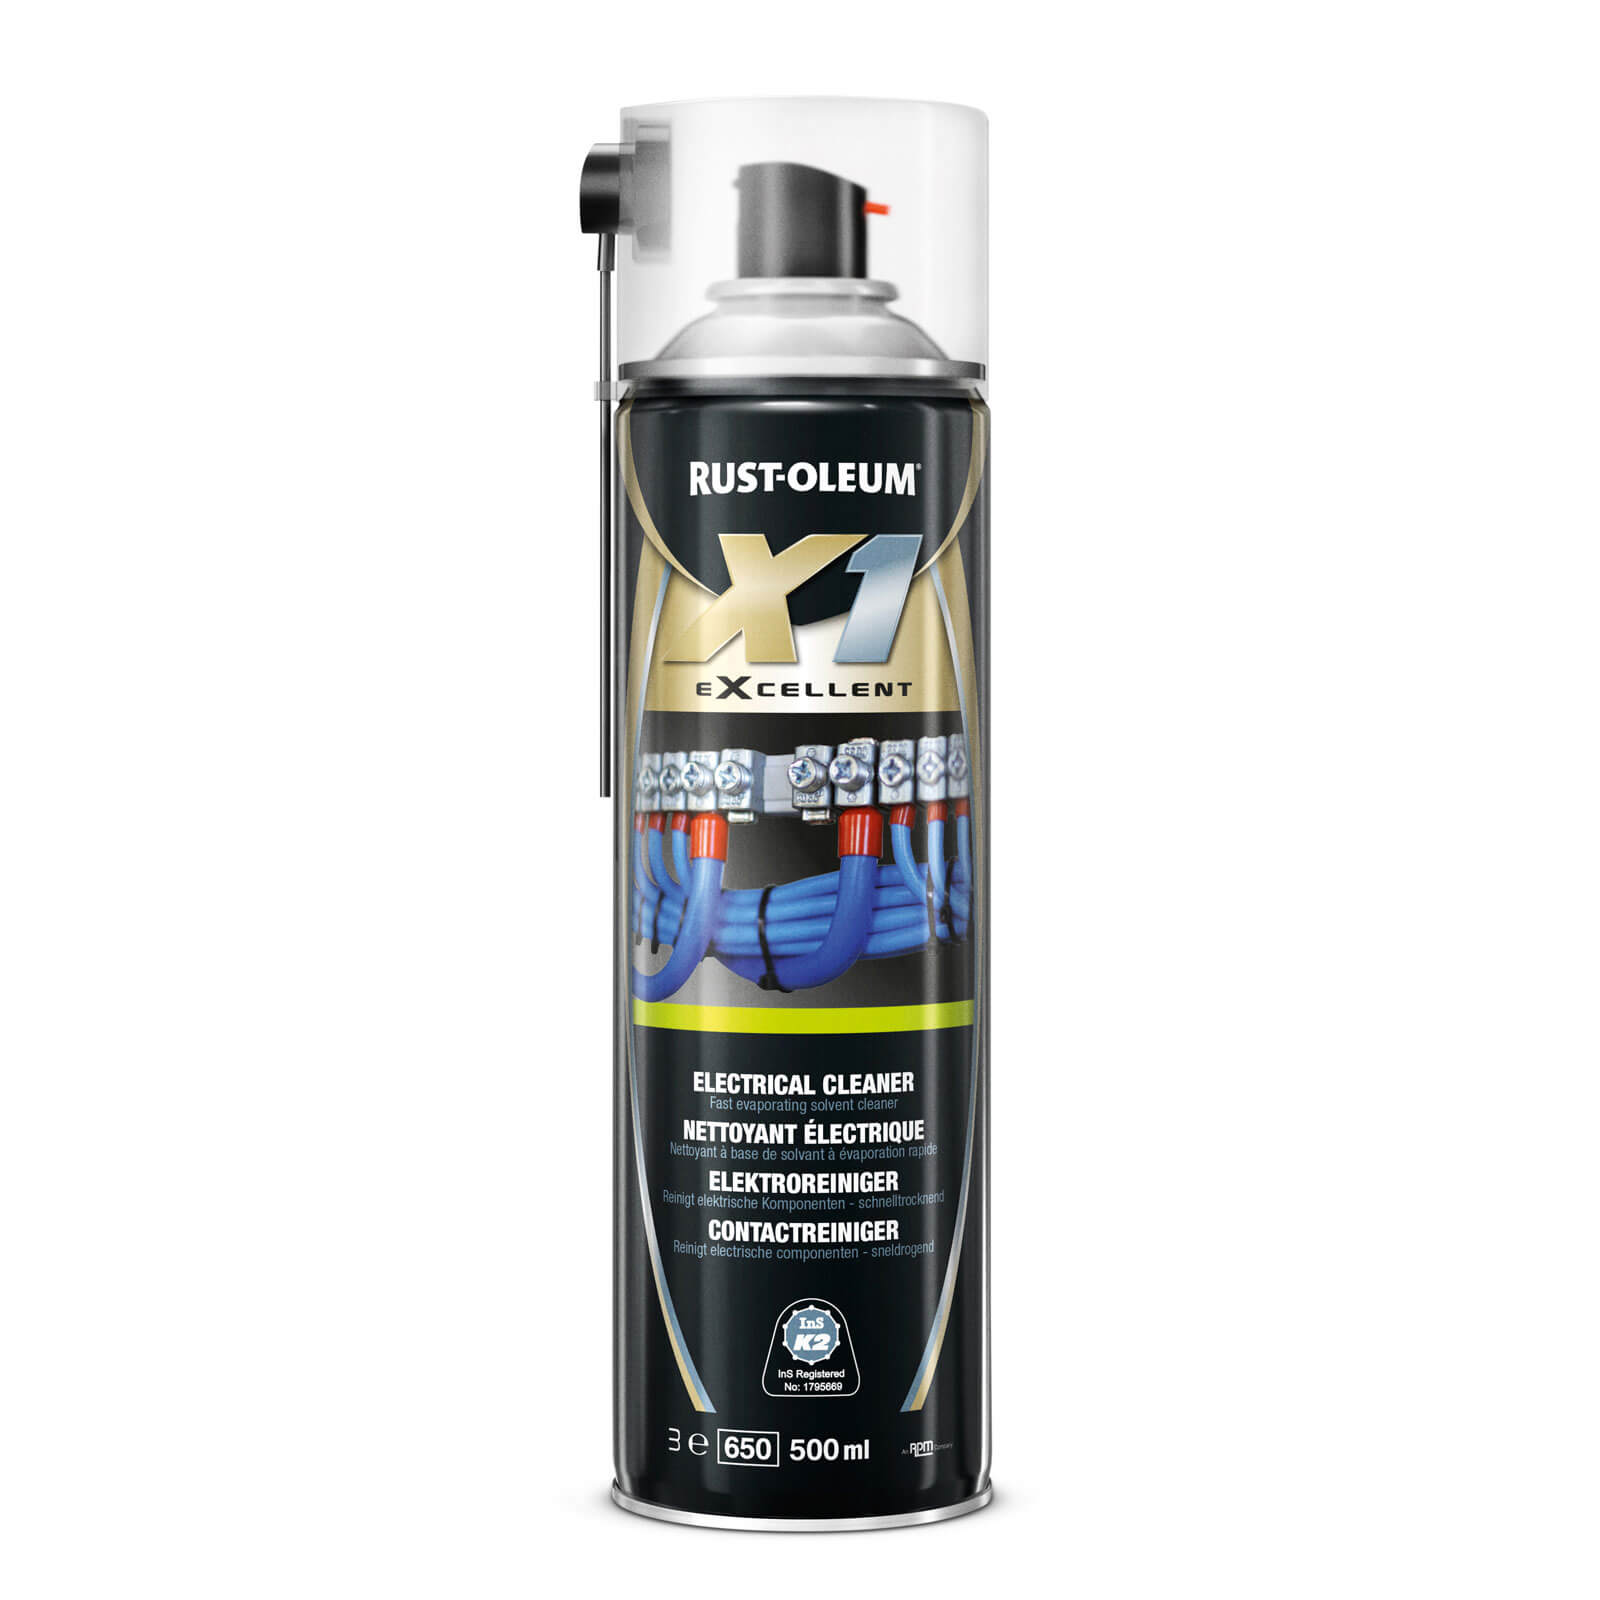 Image of Rust Oleum X1 eXcellent Electrical Cleaner Spray 500ml